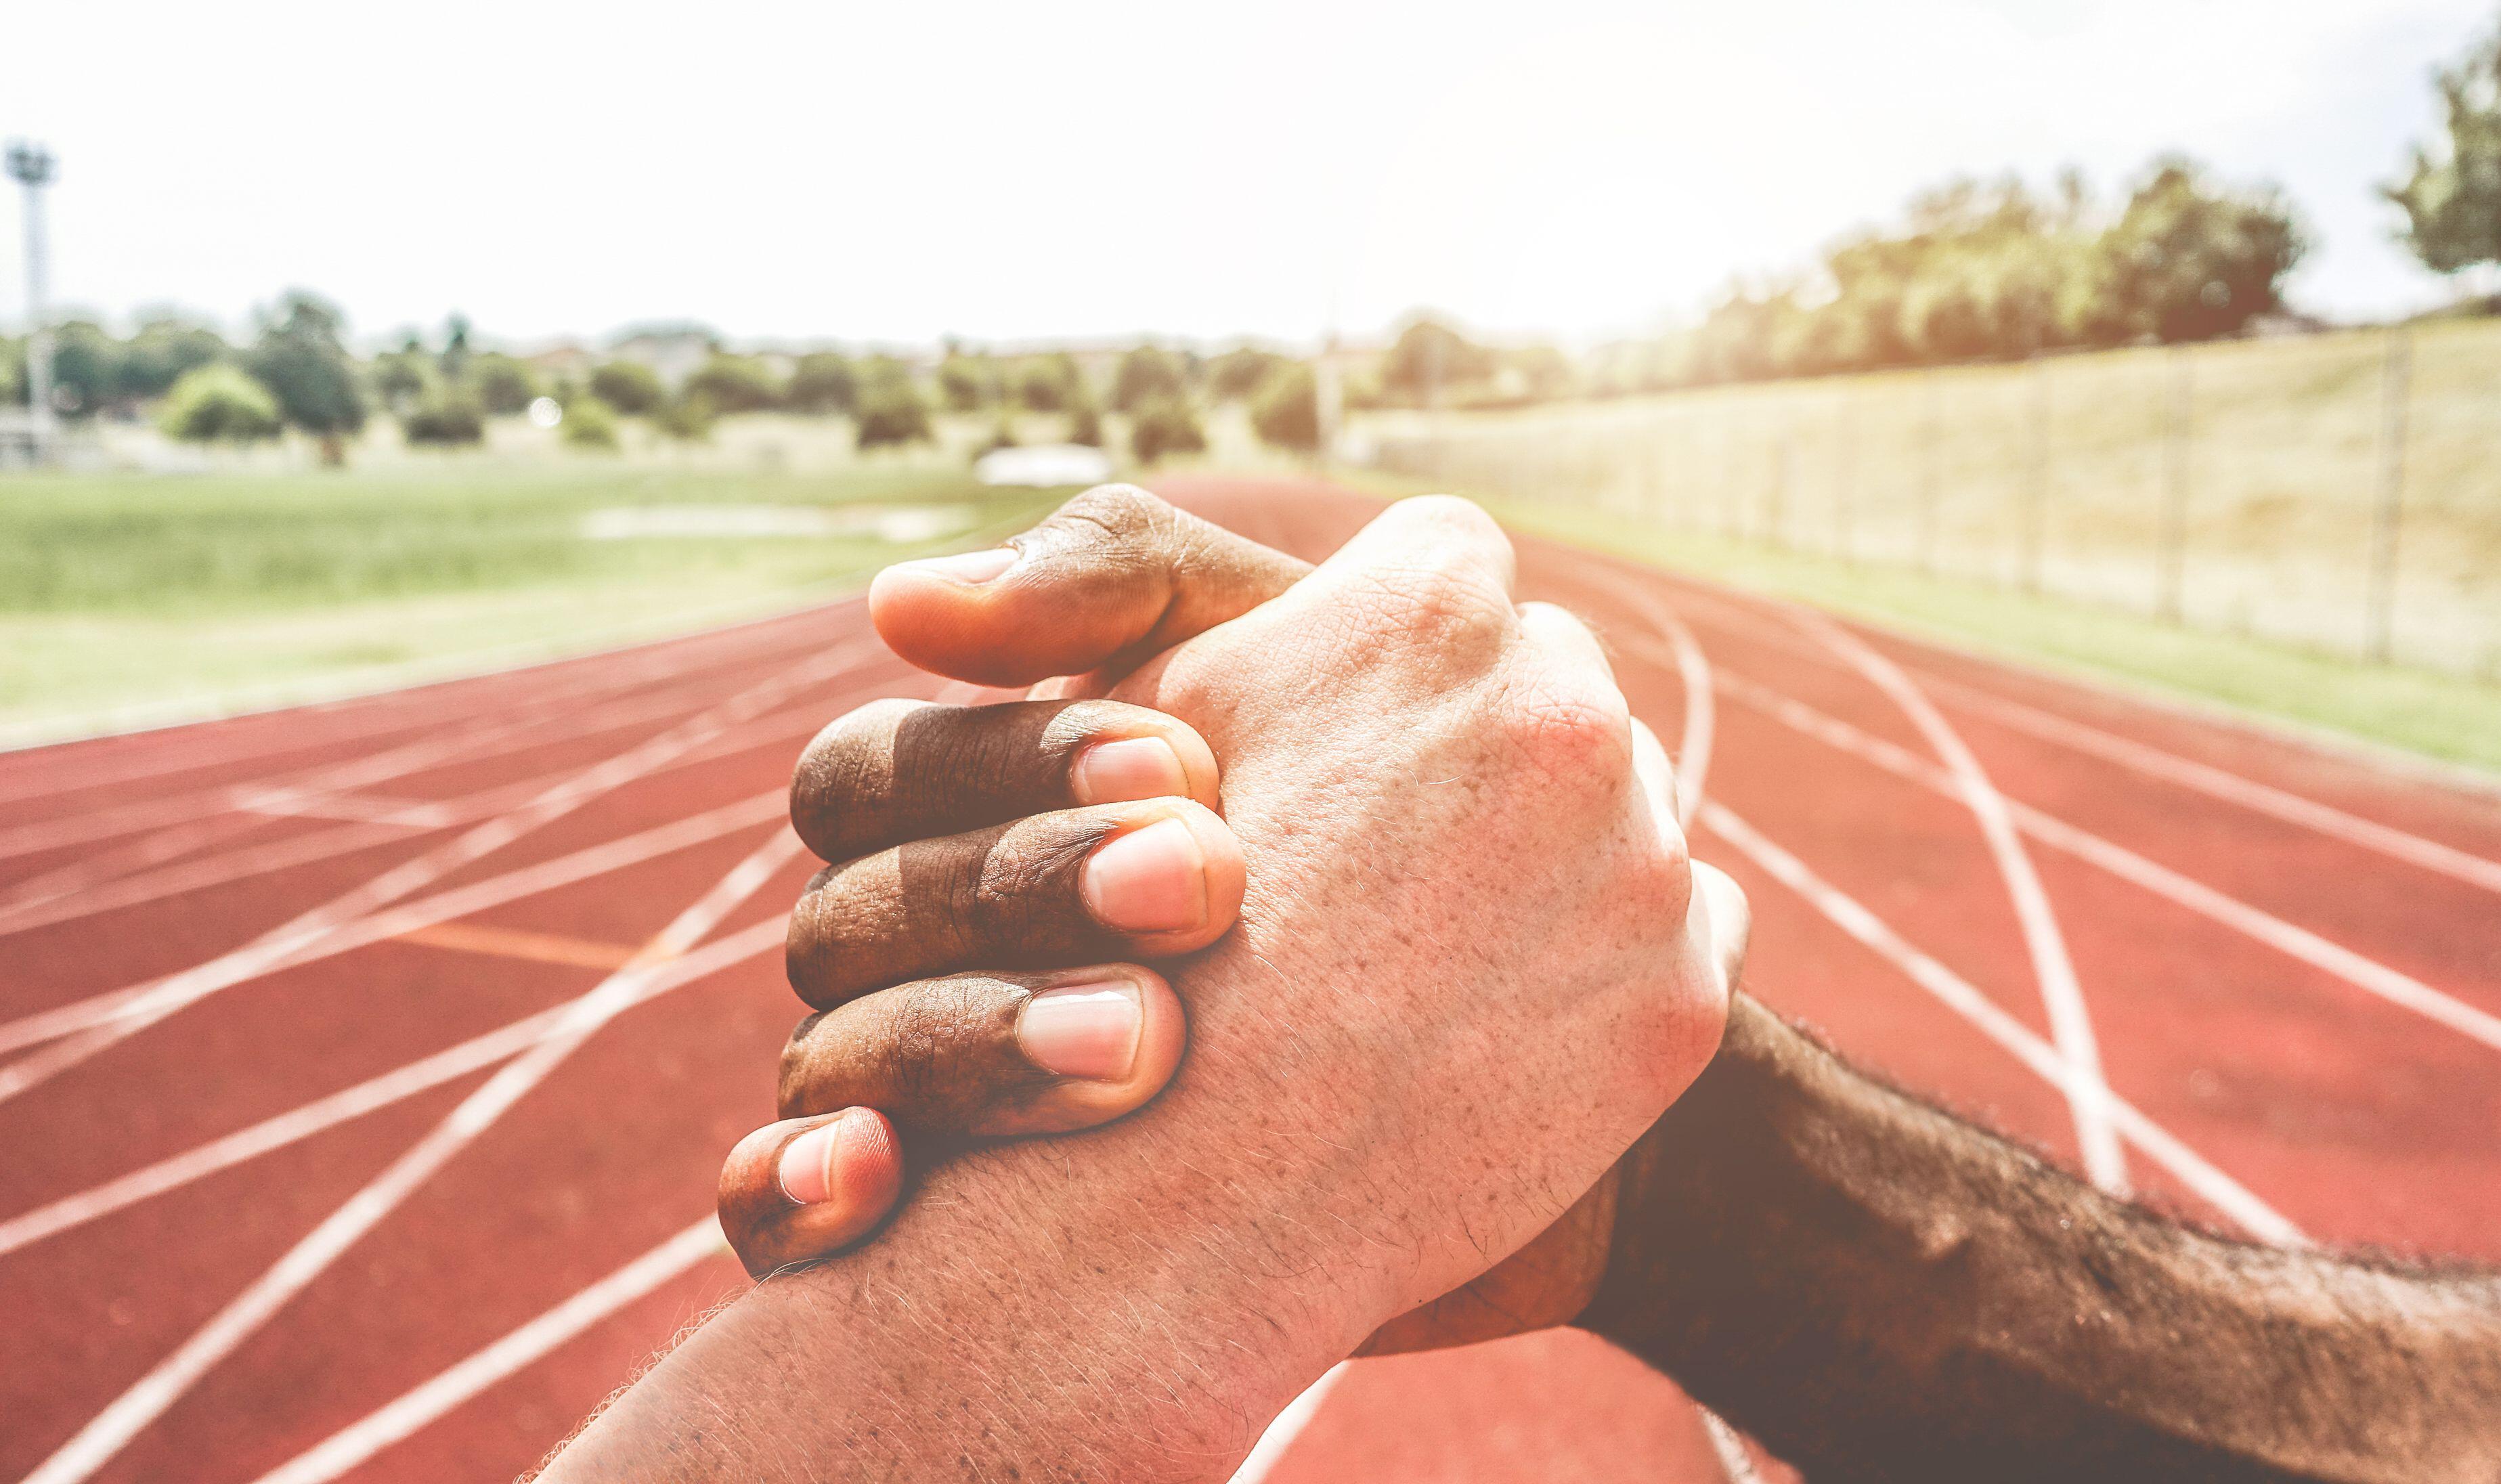 Hands clasped on an athletics track